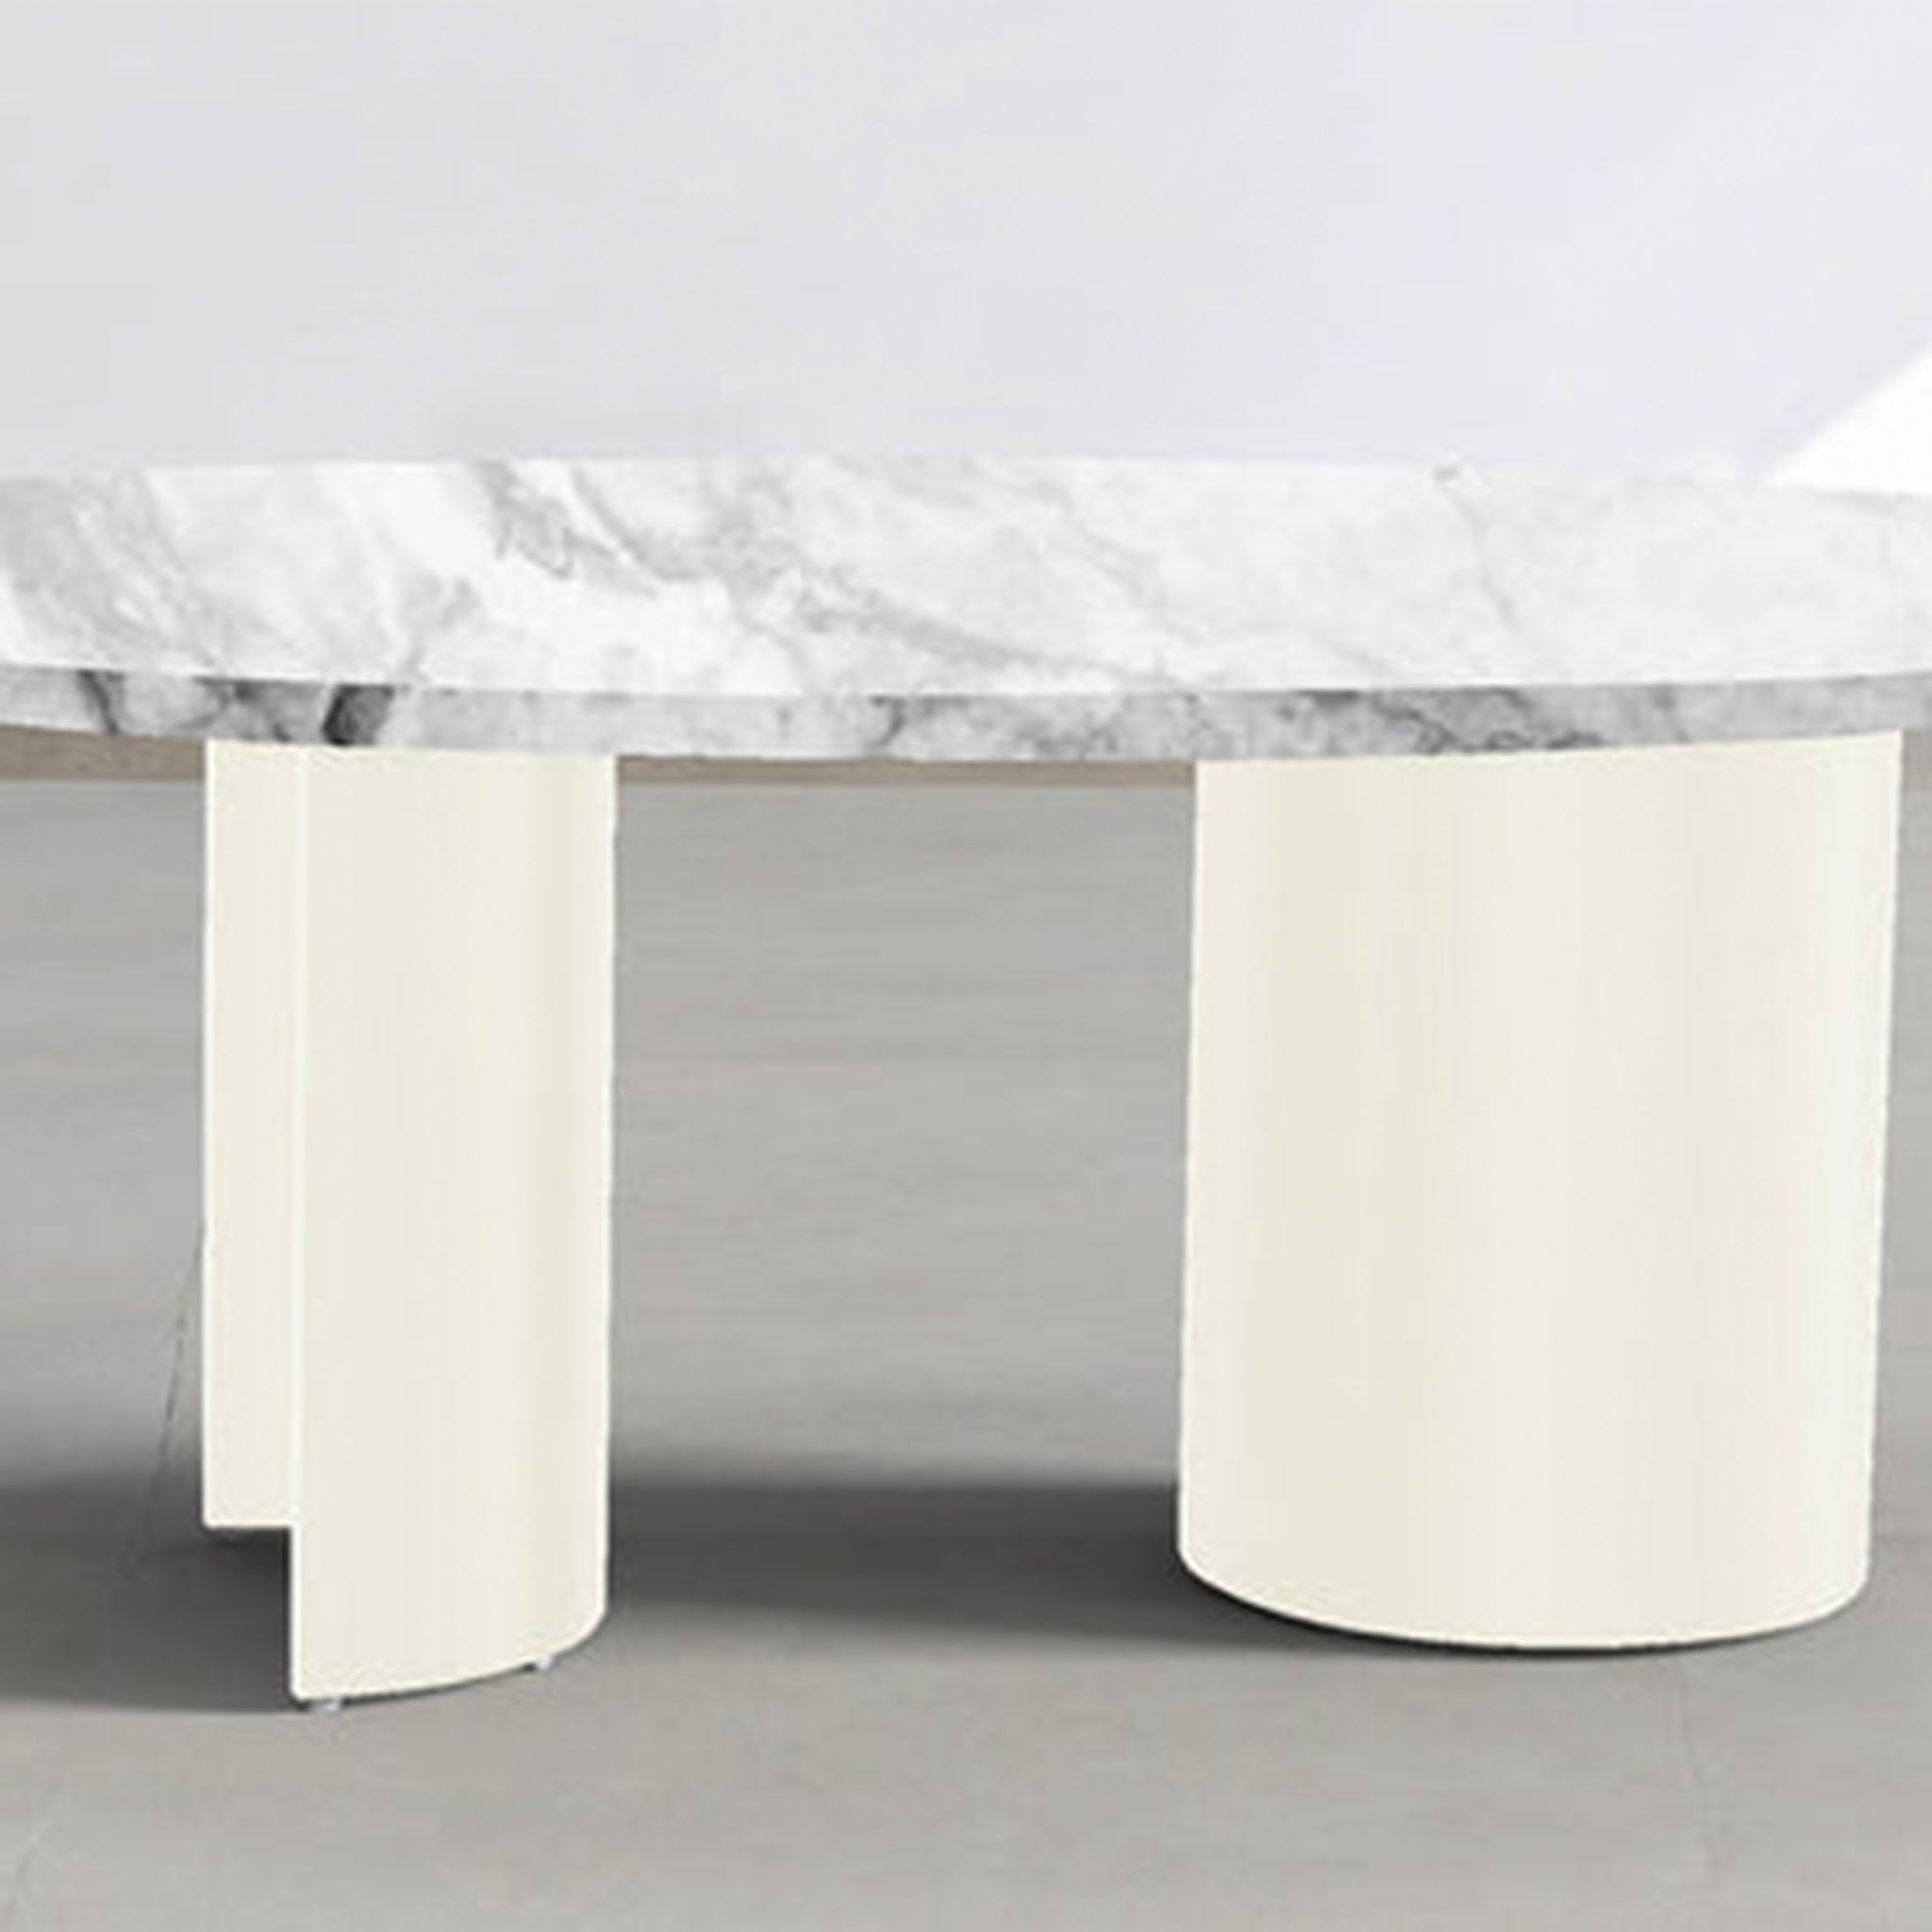 Unique Marble Top: Natural variations make each table a one-of-a-kind piece.